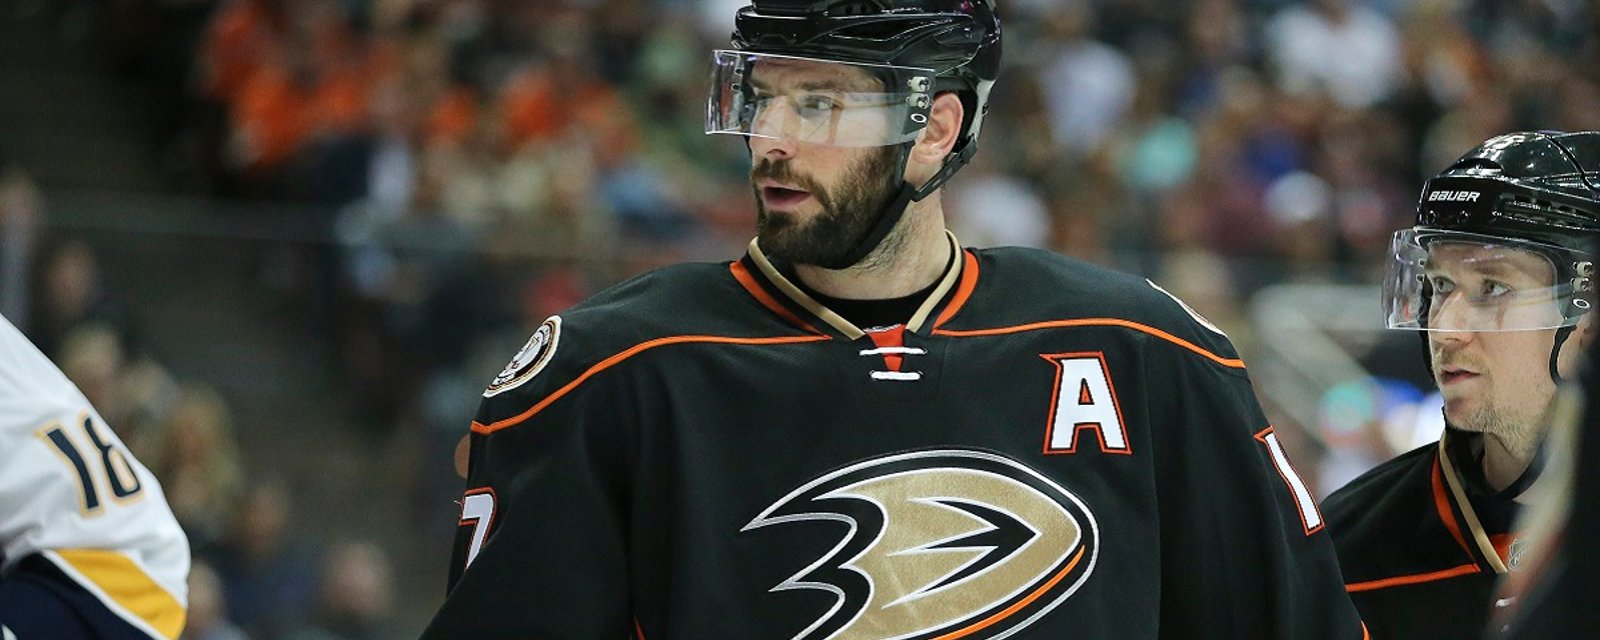 Ryan Kesler calls out NHL player and his team for being soft.